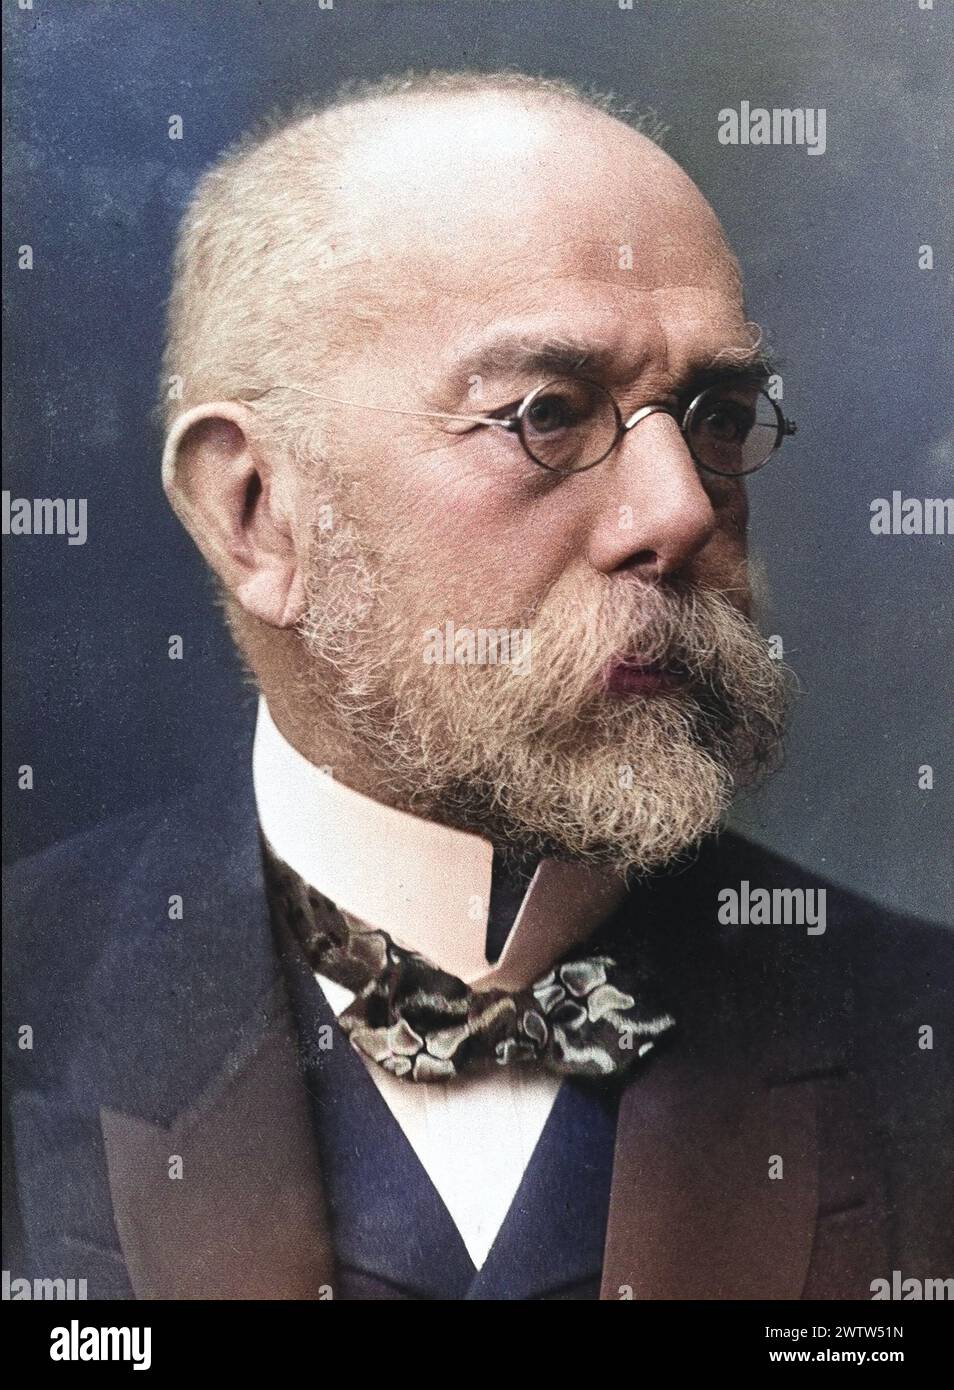 ROBERT KOCH (1843-1910) German physician and microbiologist about 1907 Stock Photo